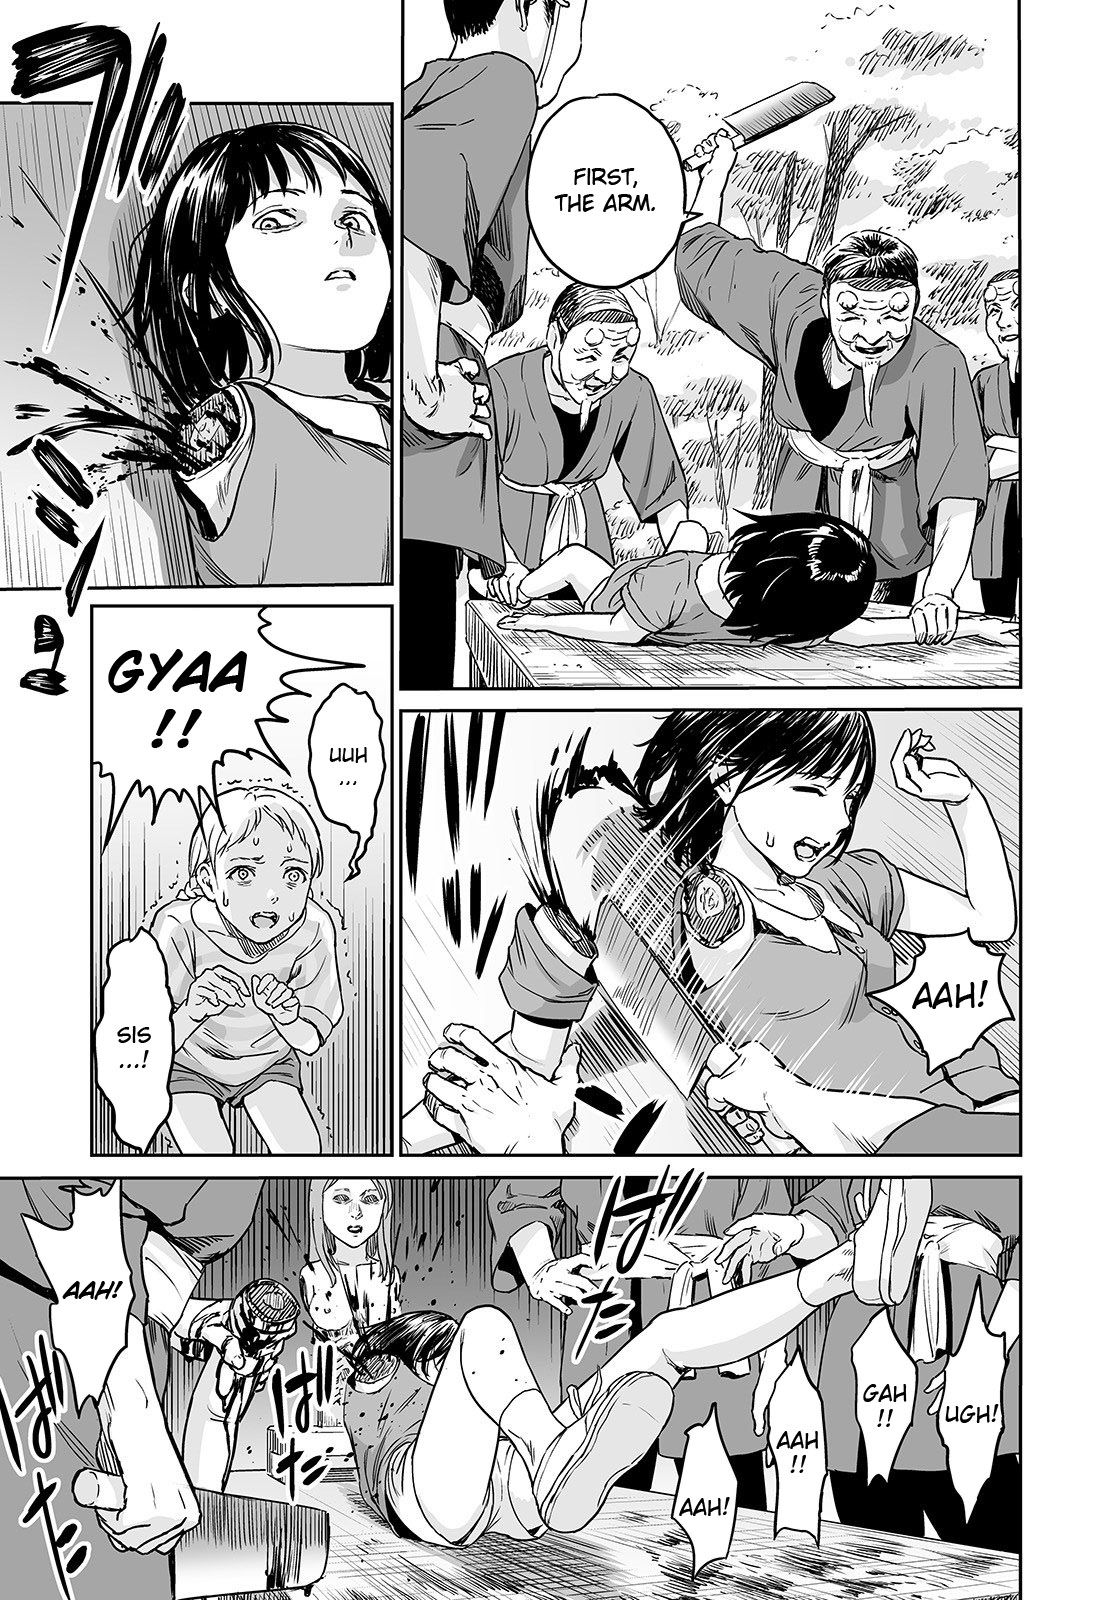 Oogetsuhime no Yama | The Mountain of Amputee Princesses =7BA= - Page 11 -  HentaiEra